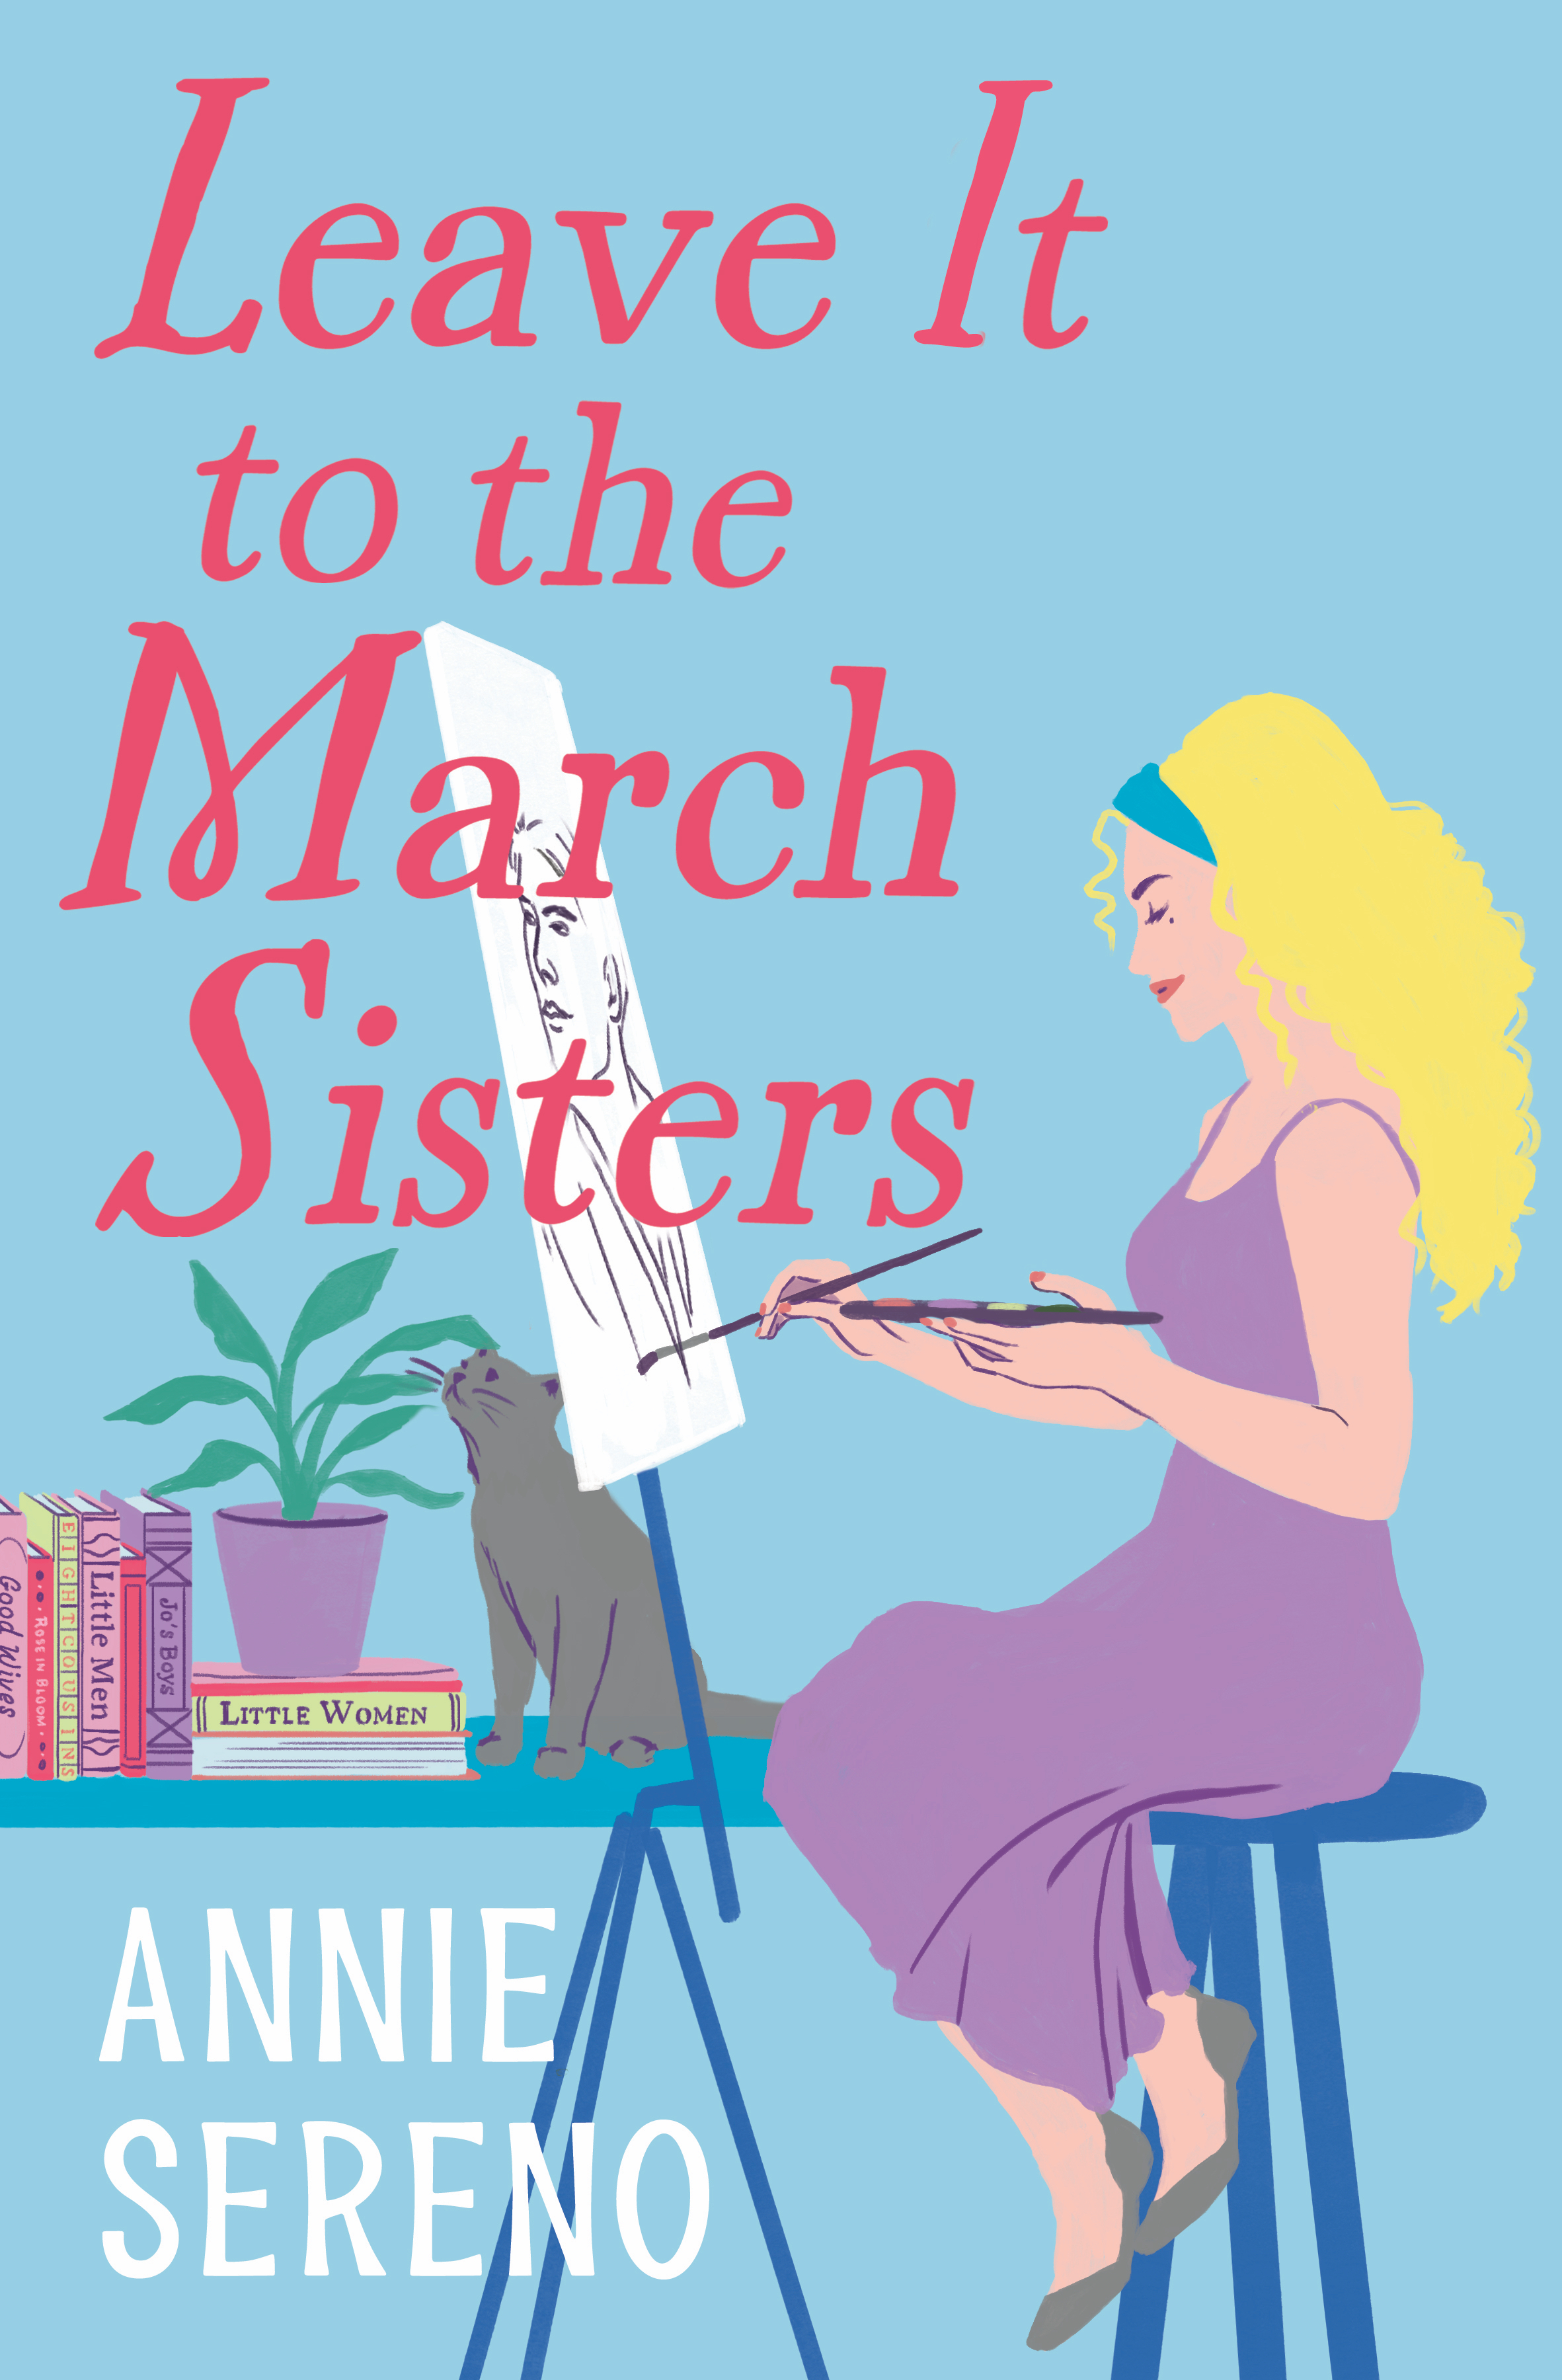 Leave It to the March Sisters by Annie Sereno Hachette Book Group image pic image